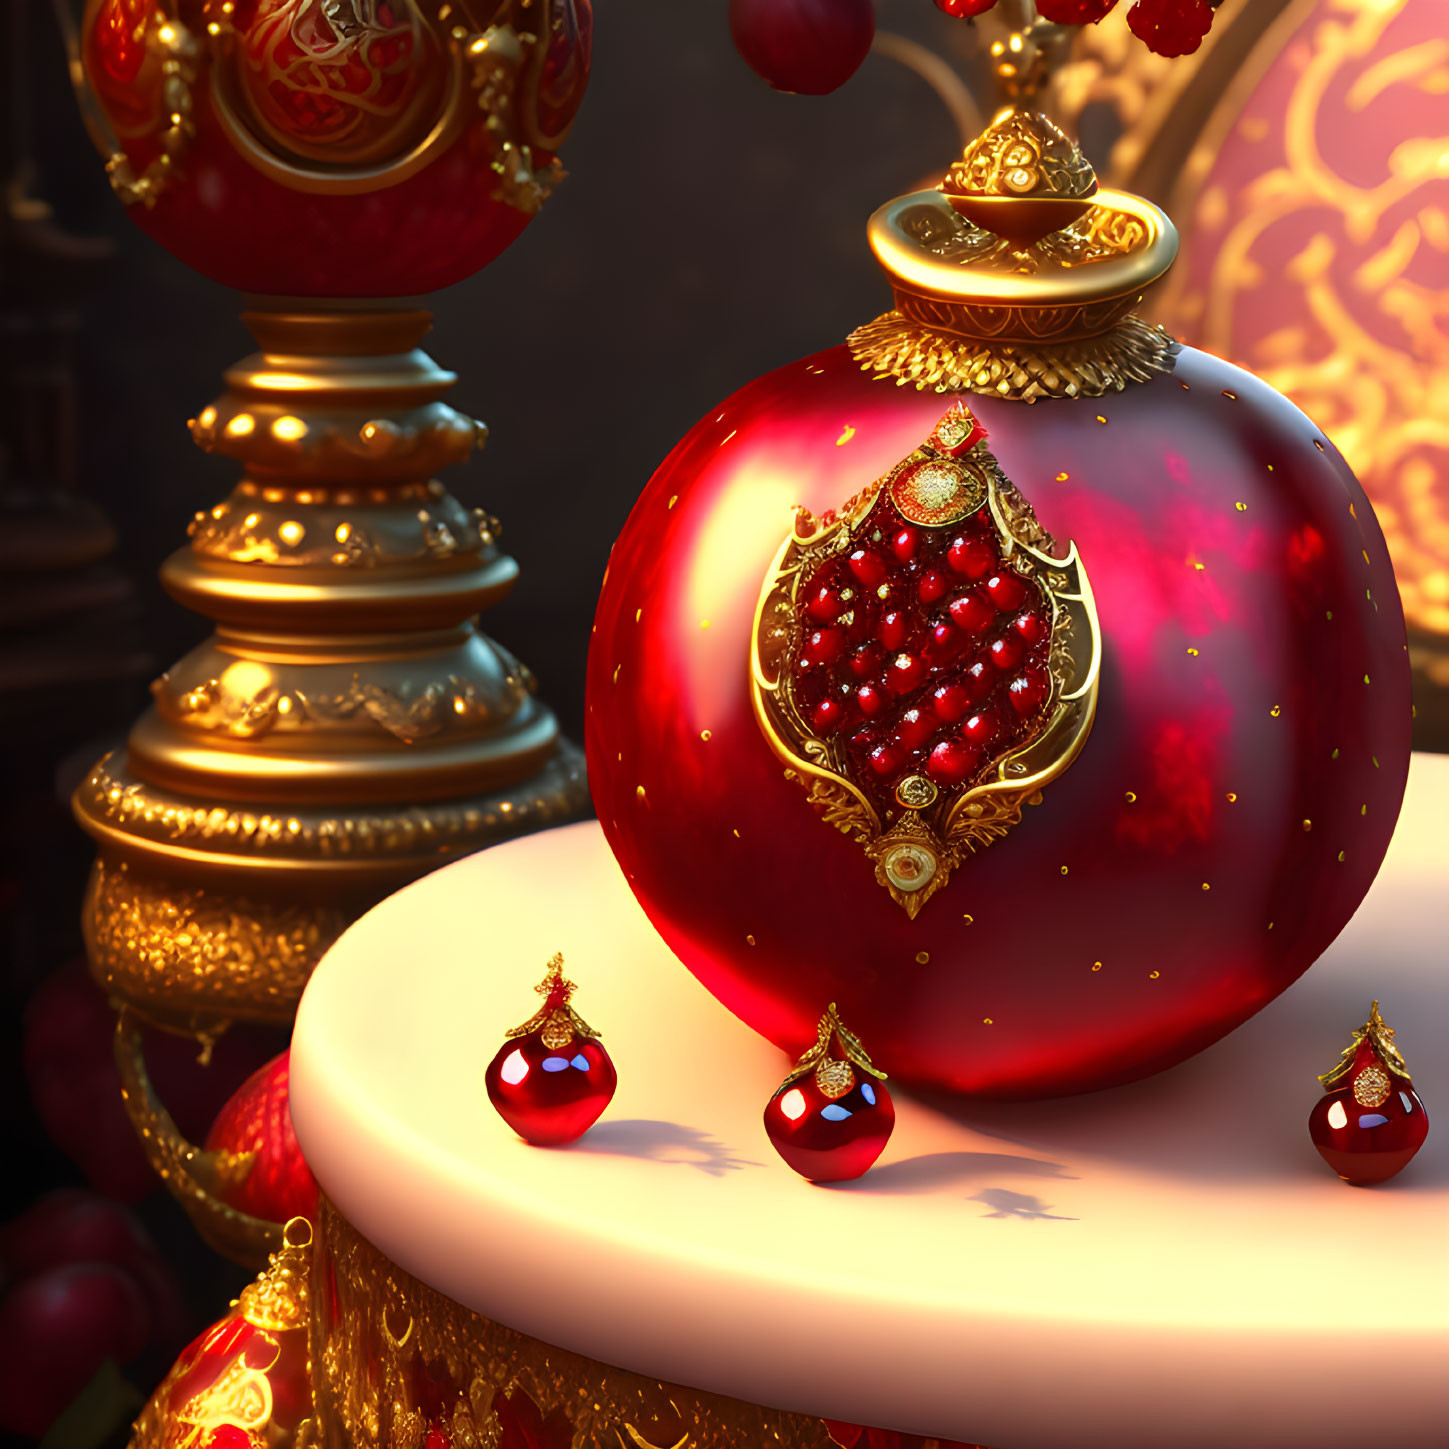 Luxurious Red and Gold Christmas Bauble with Intricate Designs on Festive Background